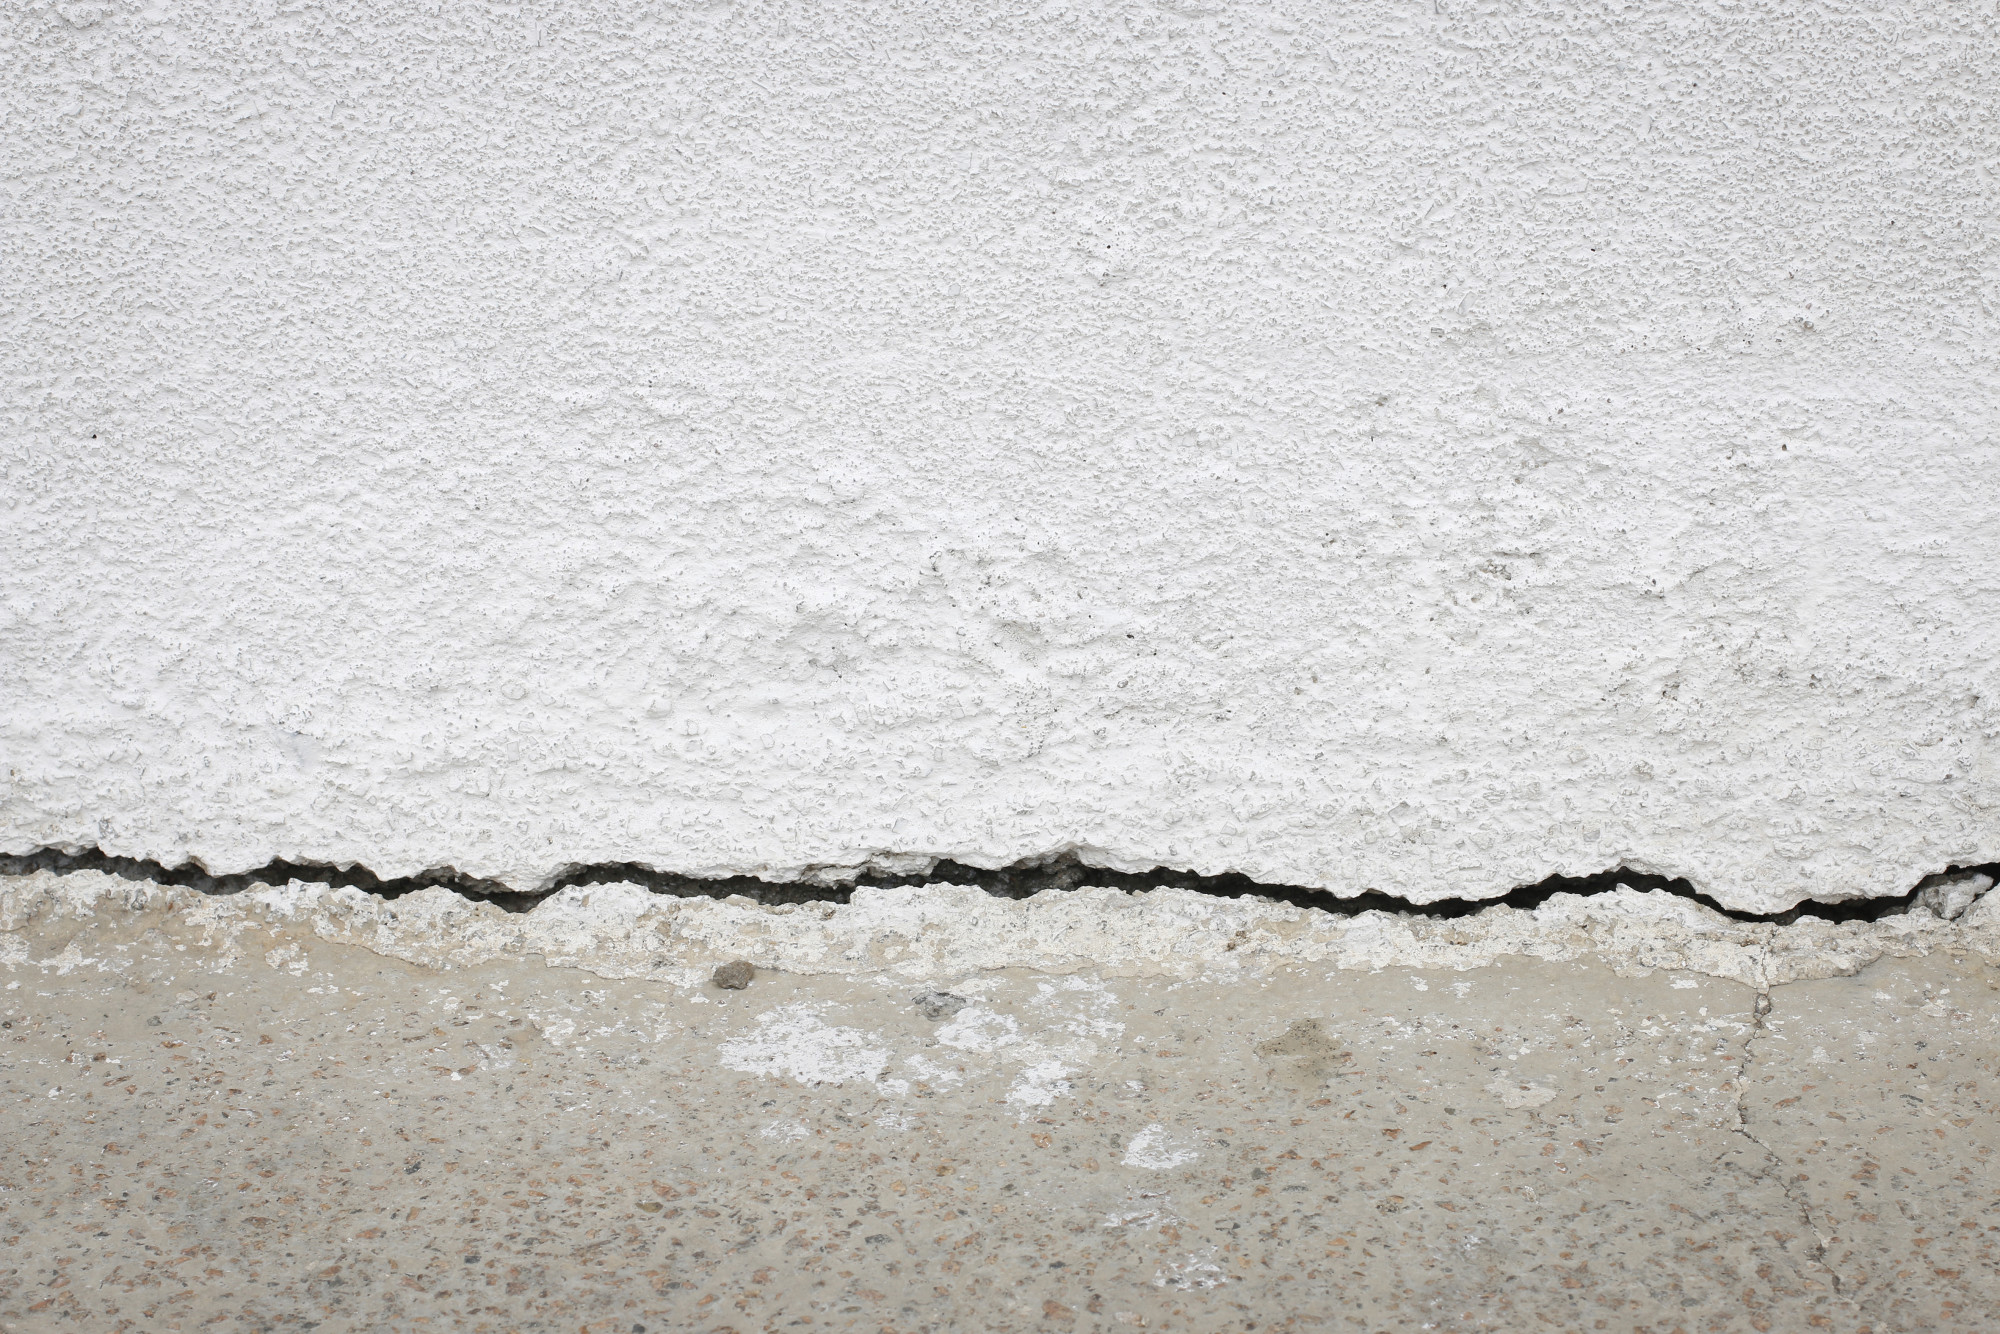 7 Small Signs of Foundation Damage